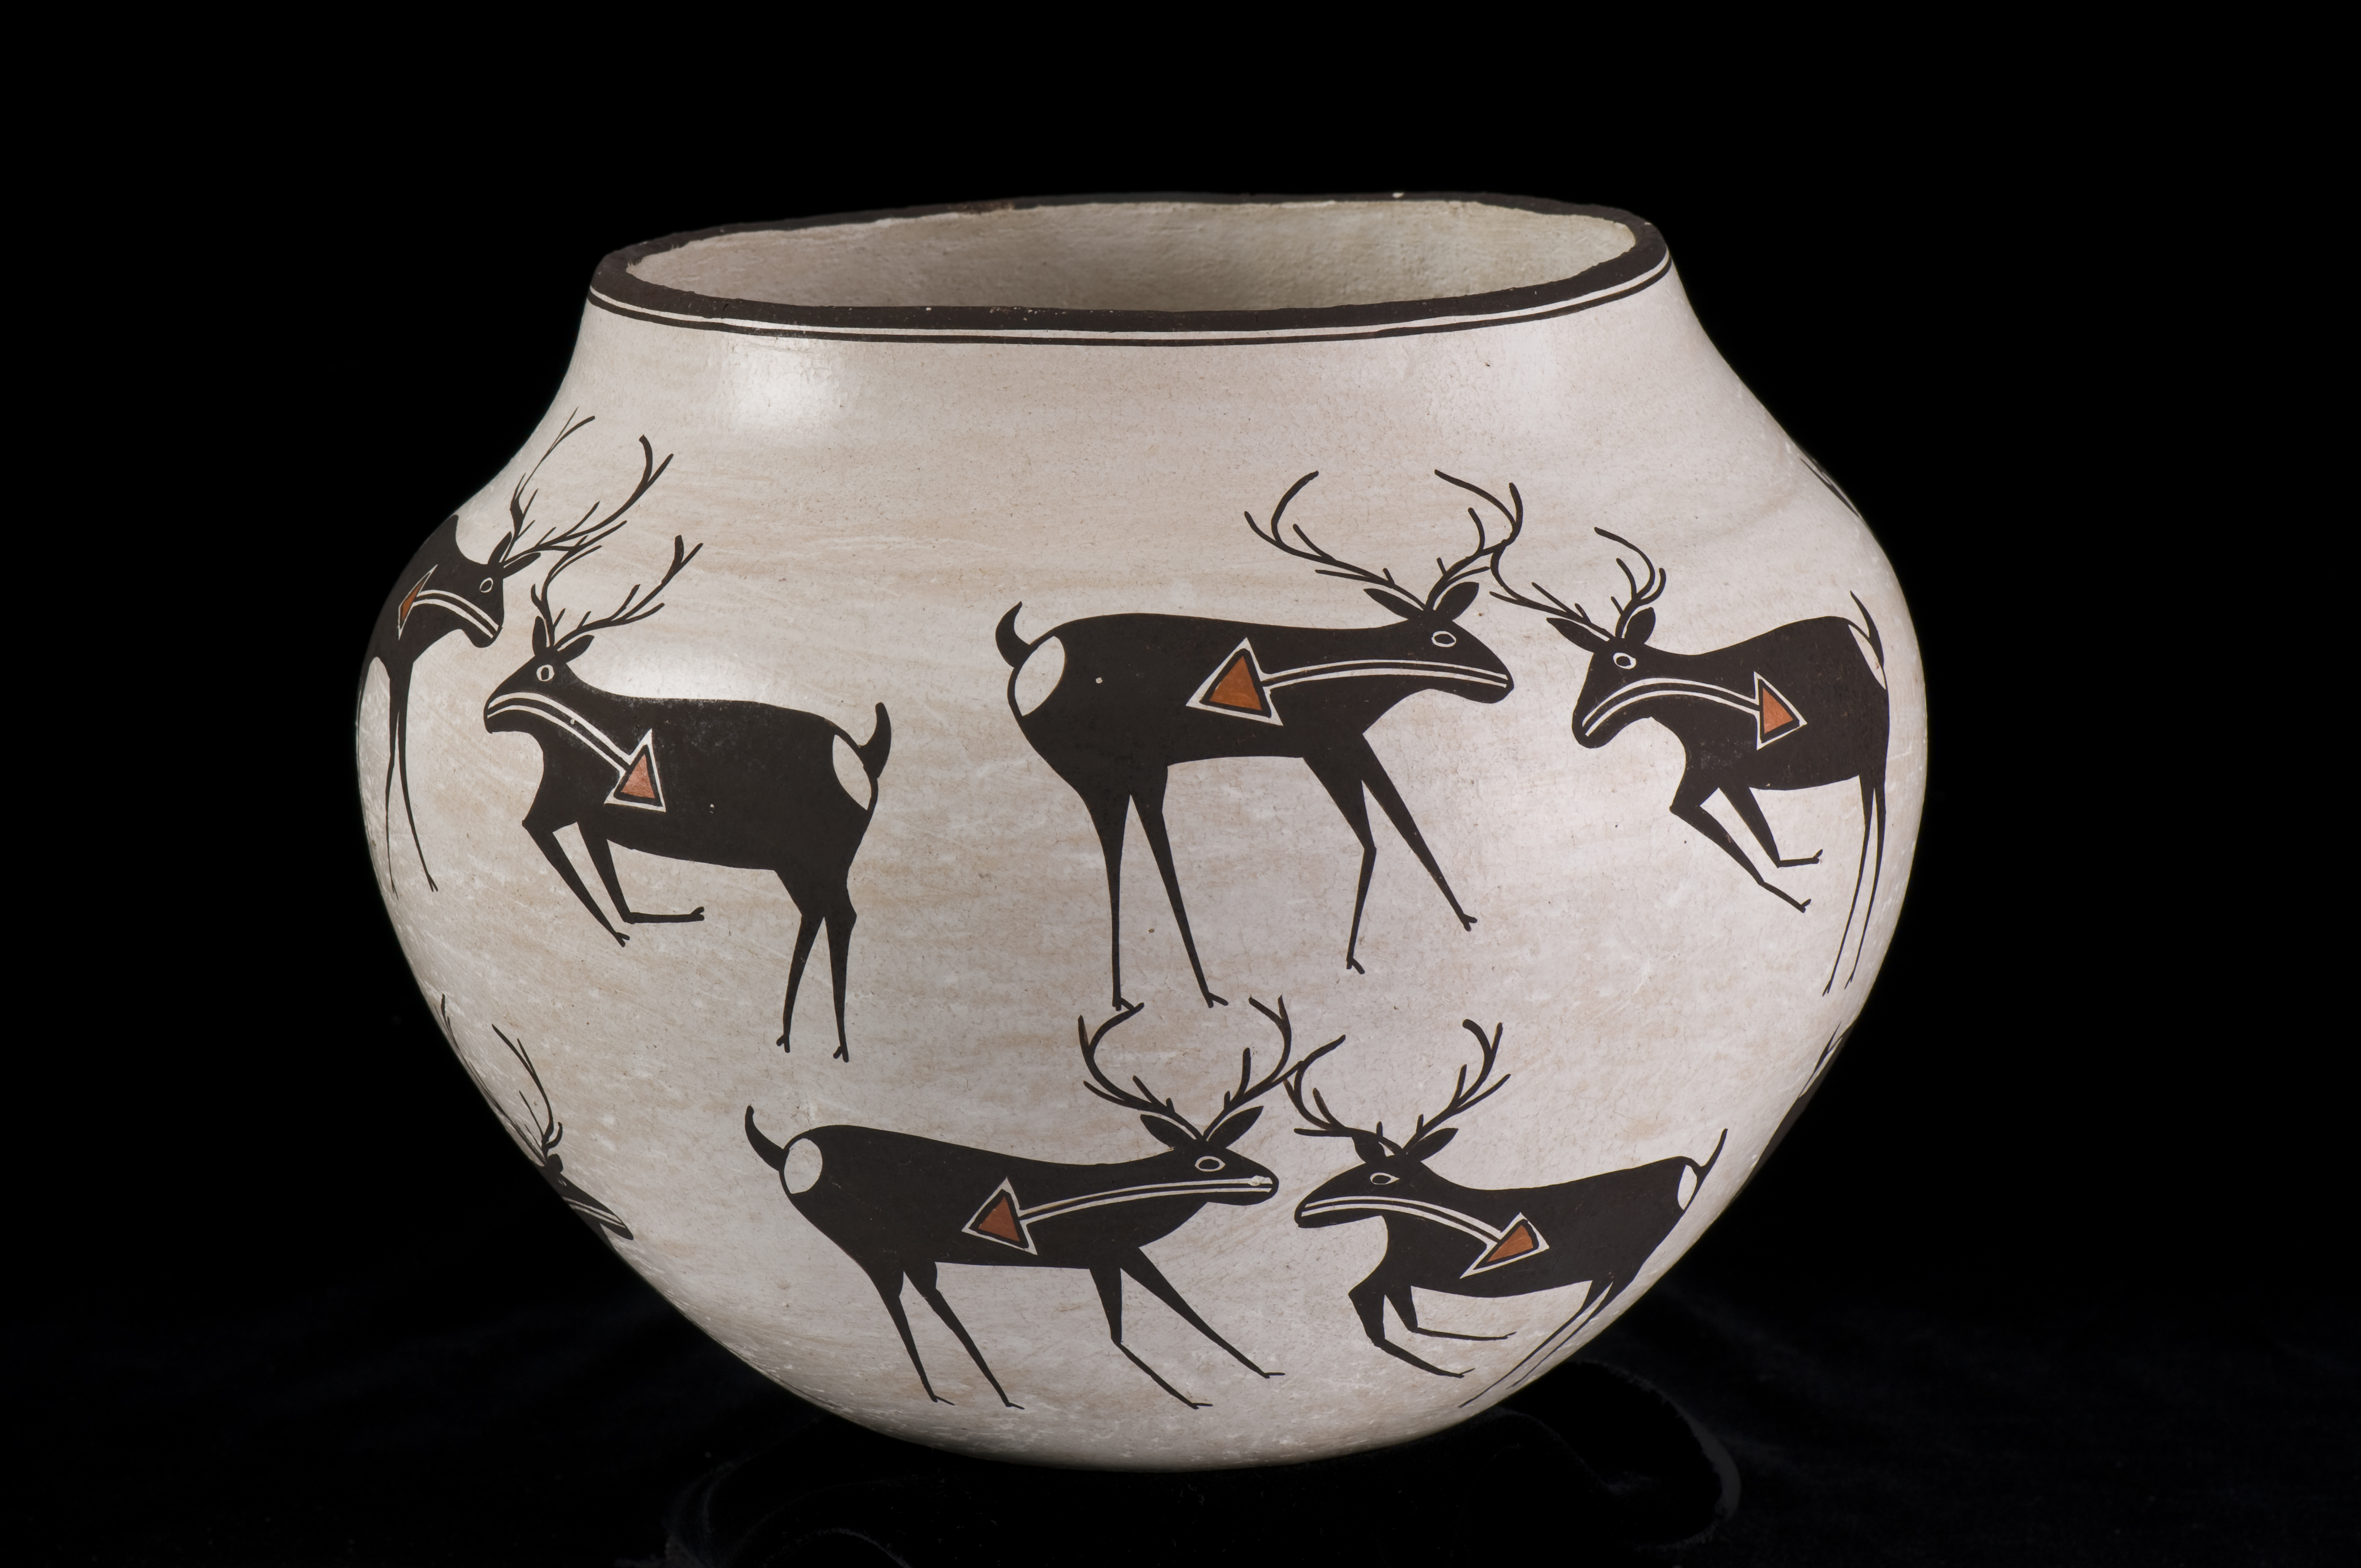 Olla. By Lucy Lewis (Acoma Pueblo), 1968. National Cowboy & Western Heritage Museum. 2007.28.